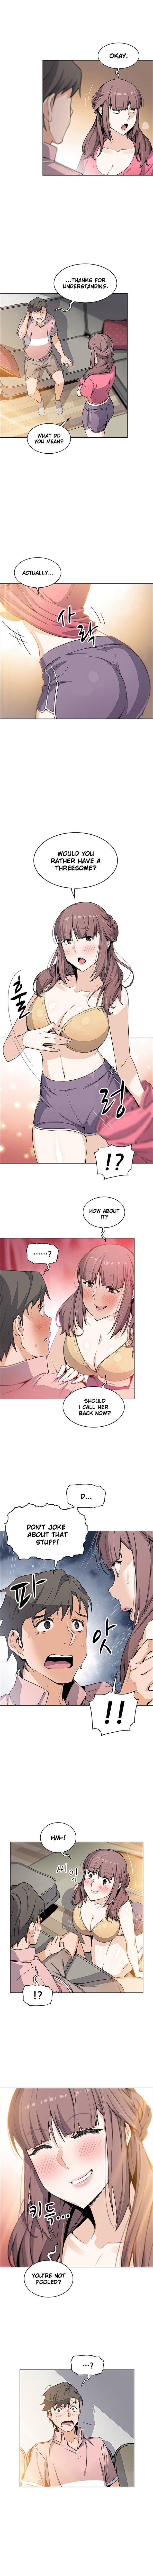 Housekeeper Manhwa - Chapter 32 Page 5